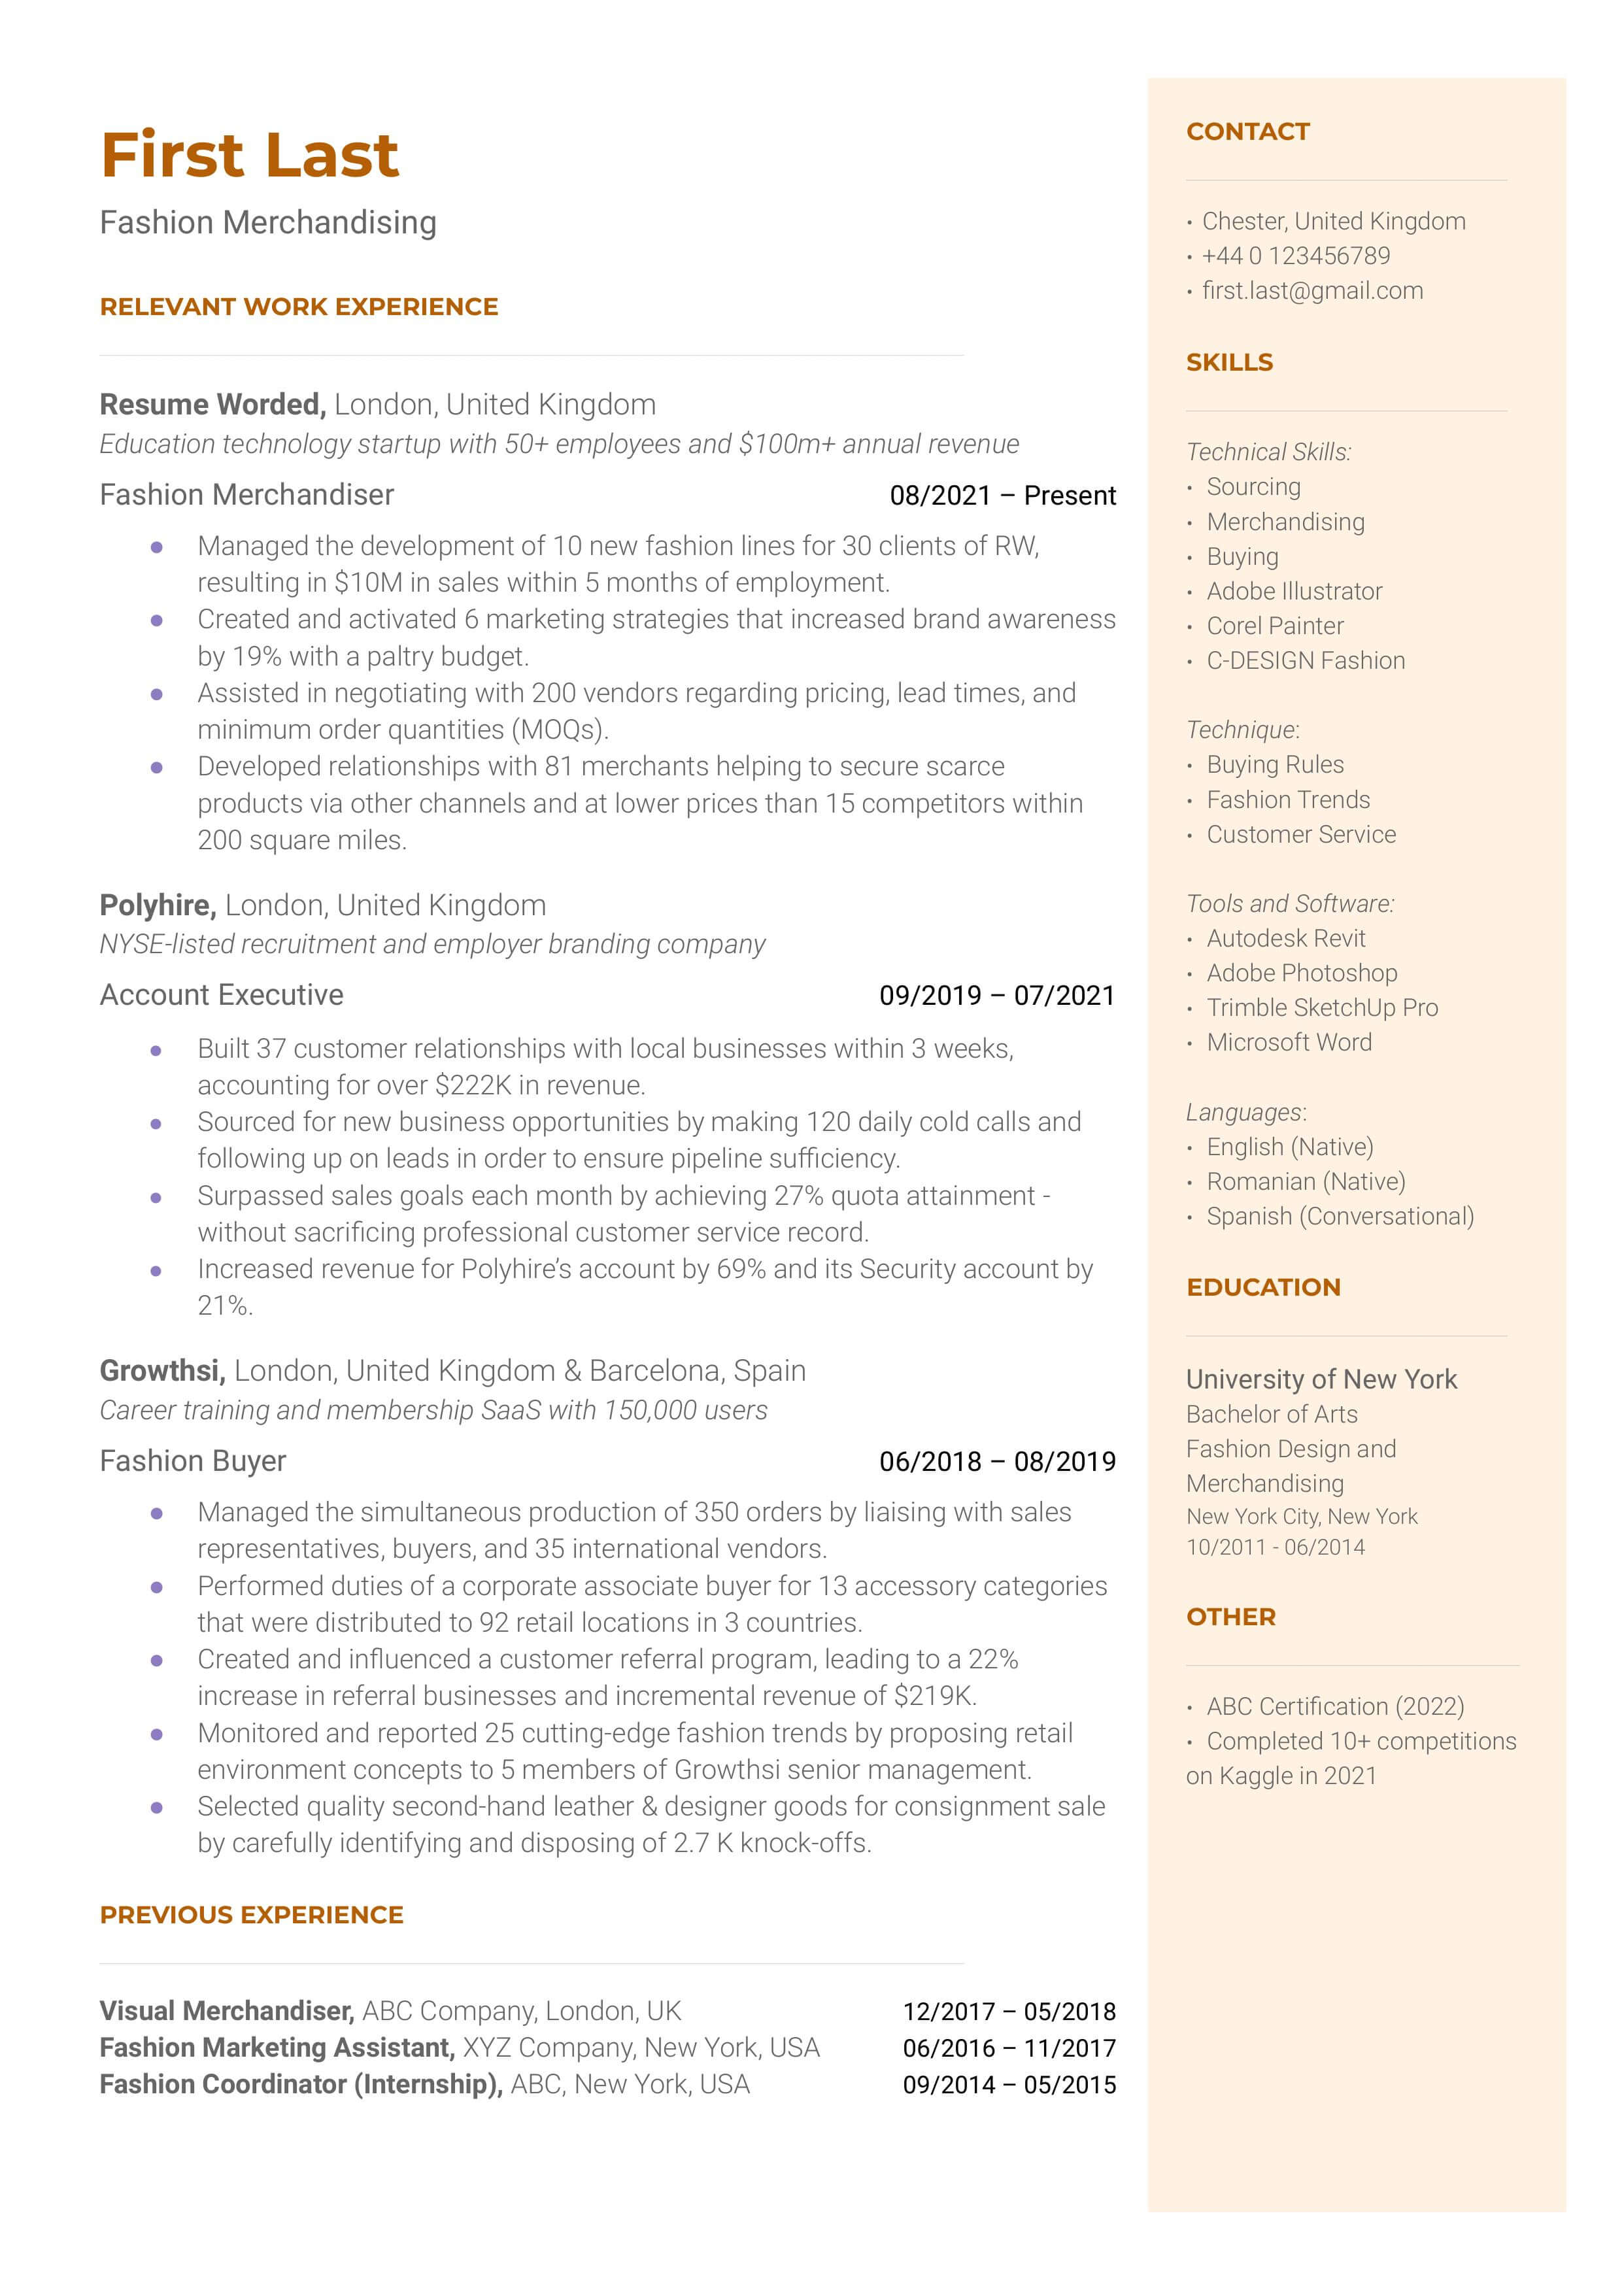 A CV example showcasing relevant skills and experiences for a Fashion Merchandising role.